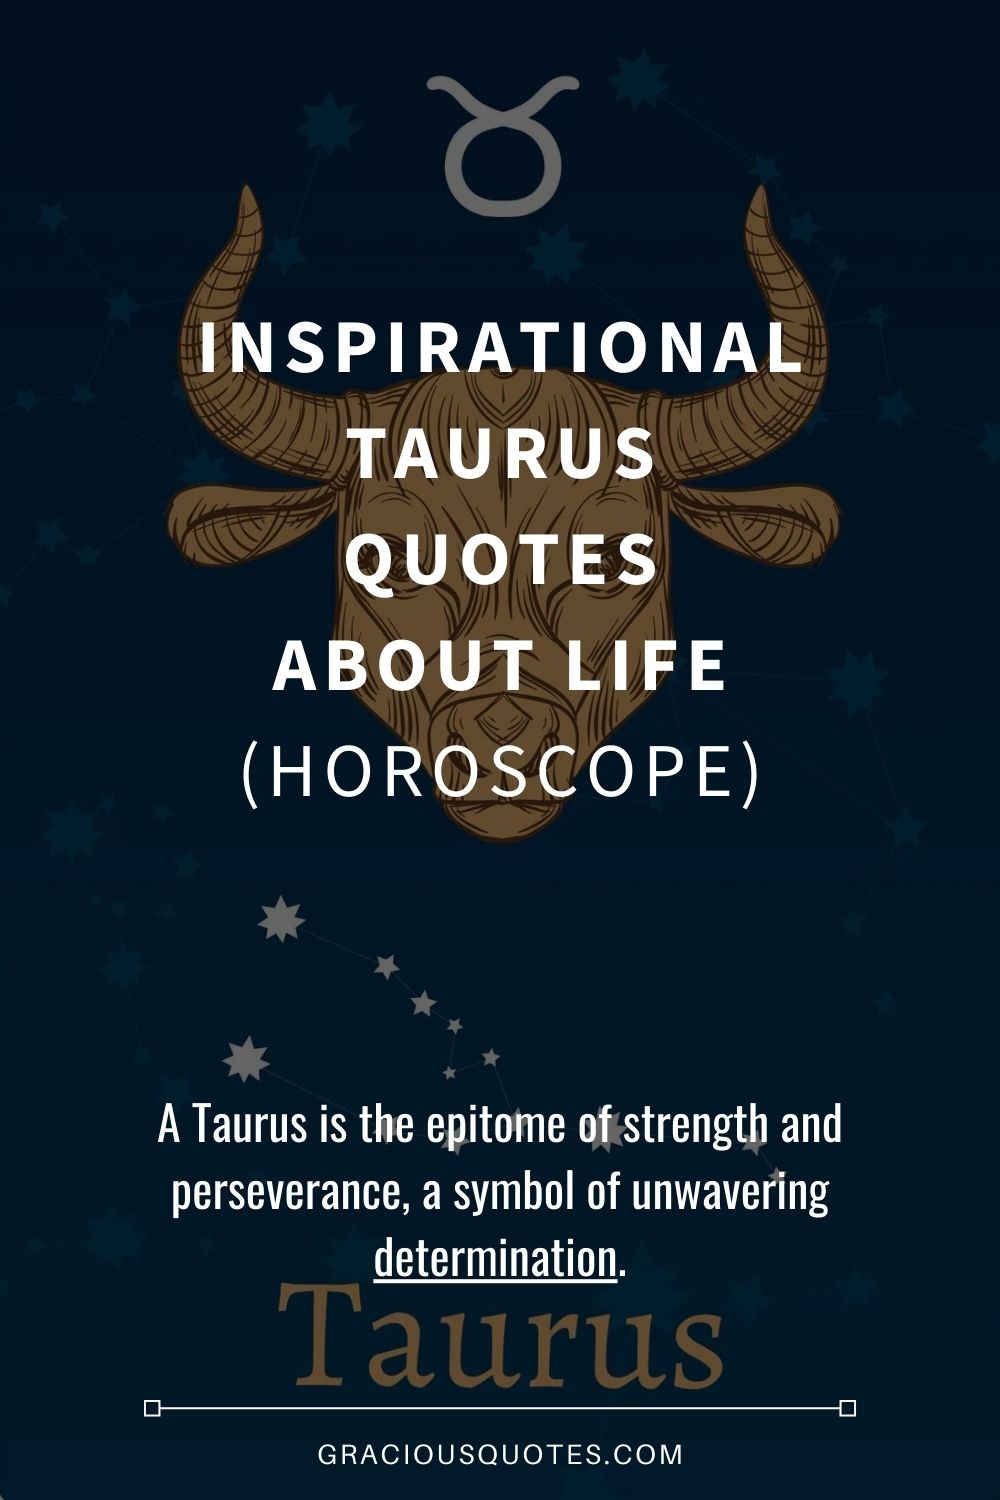 Inspirational Taurus Quotes About Life (HOROSCOPE) - Gracious Quotes